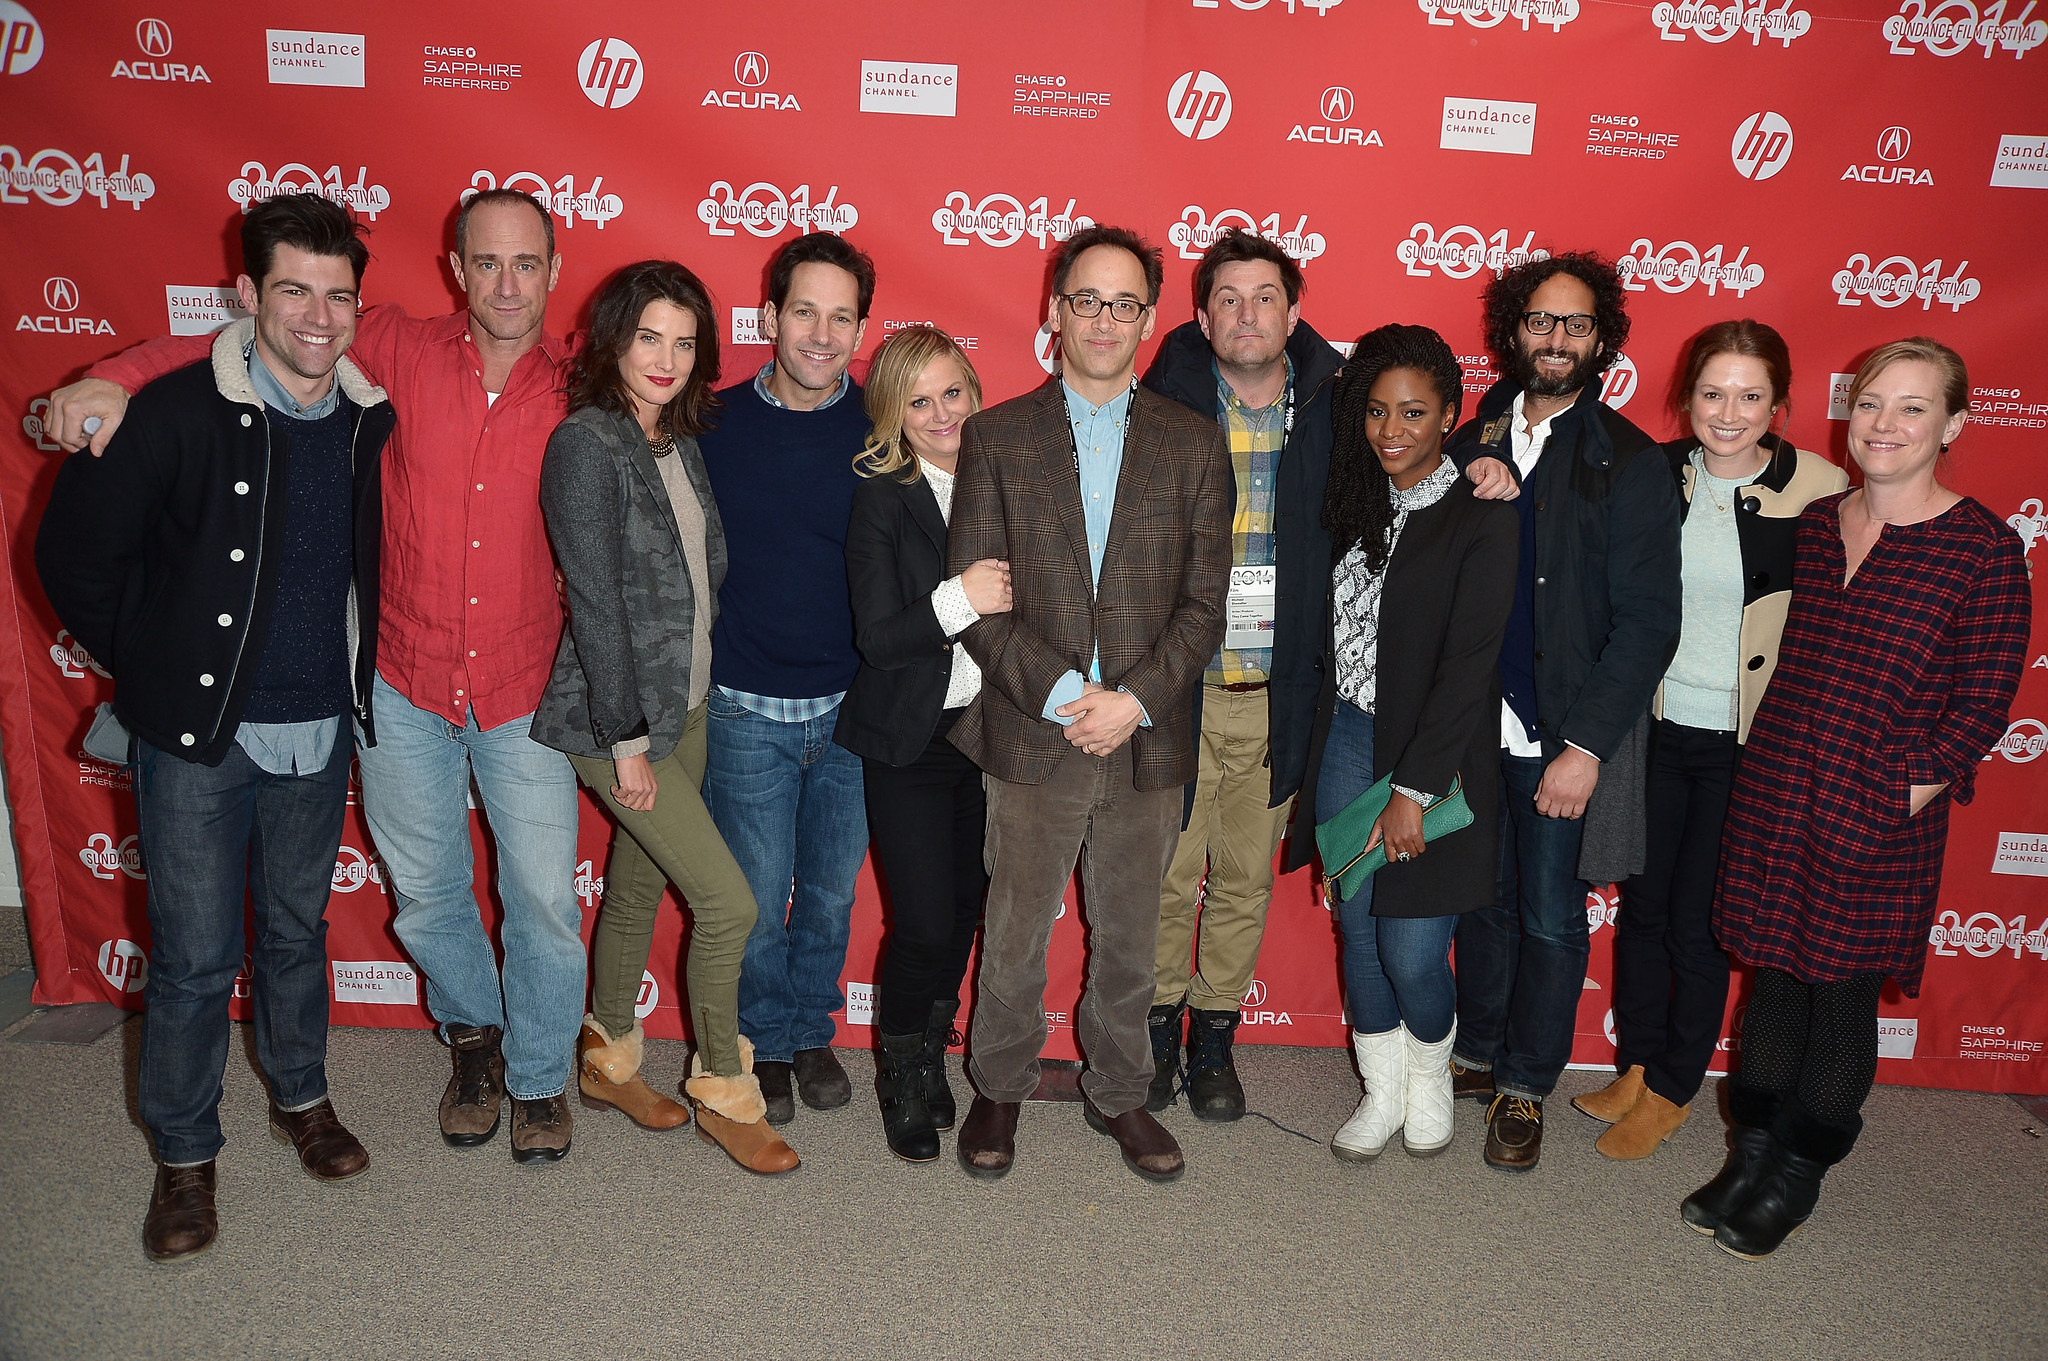 Christopher Meloni, Max Greenfield, Zandy Hartig, Amy Poehler, Paul Rudd, Michael Showalter, David Wain, Cobie Smulders, Jason Mantzoukas, Ellie Kemper and Teyonah Parris at event of They Came Together (2014)